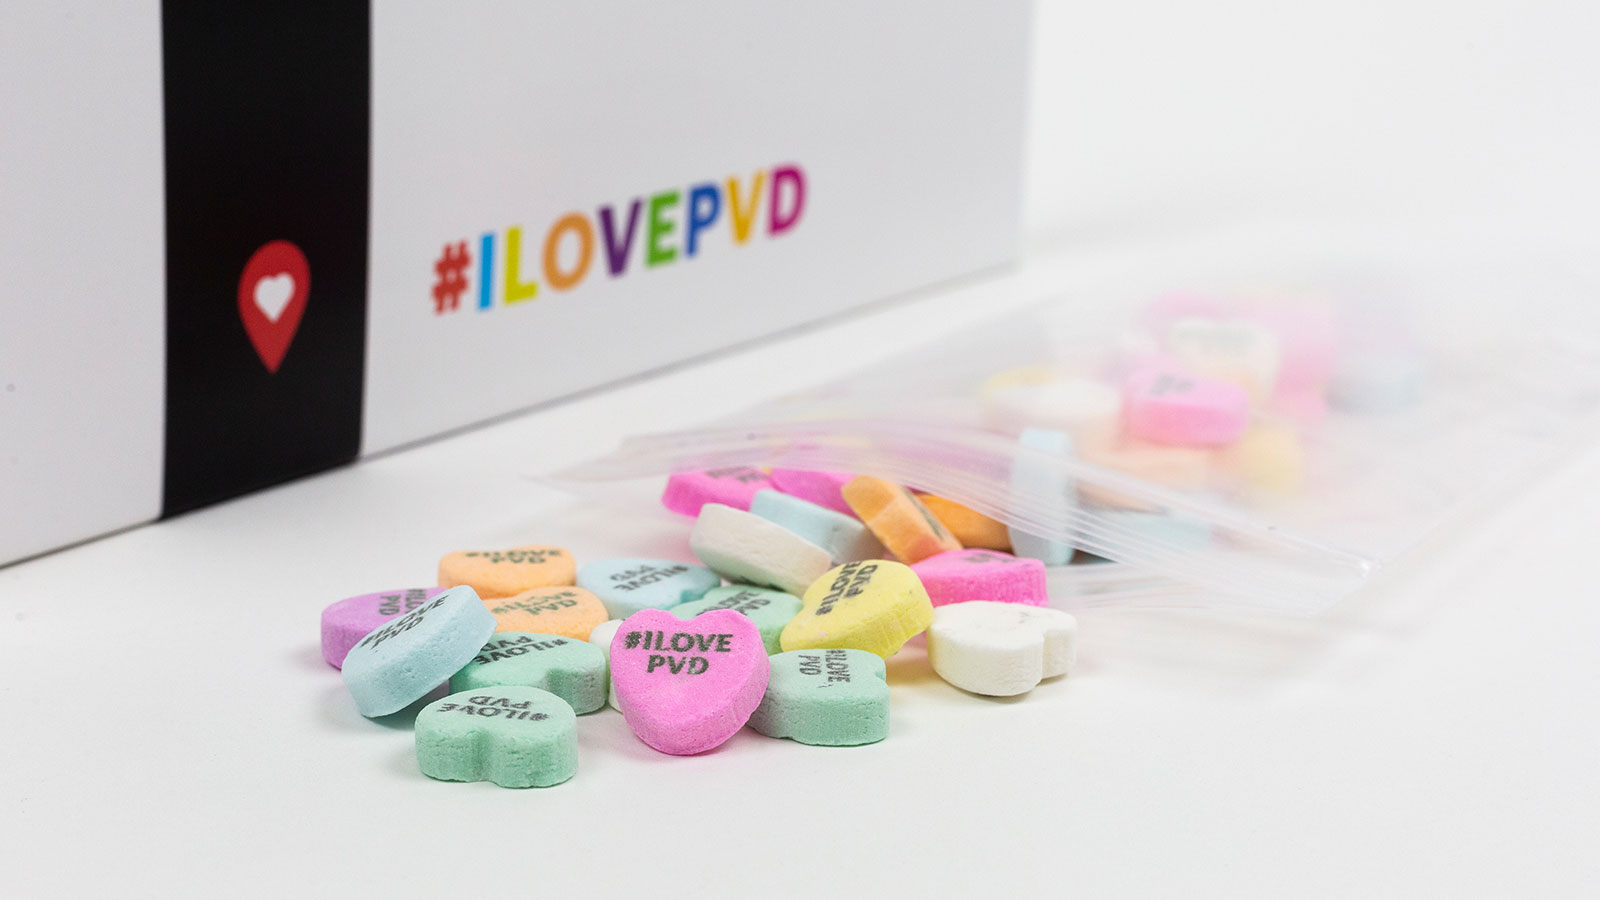 Delin Design Valentine's Day 2019 Providence Direct Mail Promotion: #ILovePVD Candy Hearts Detail